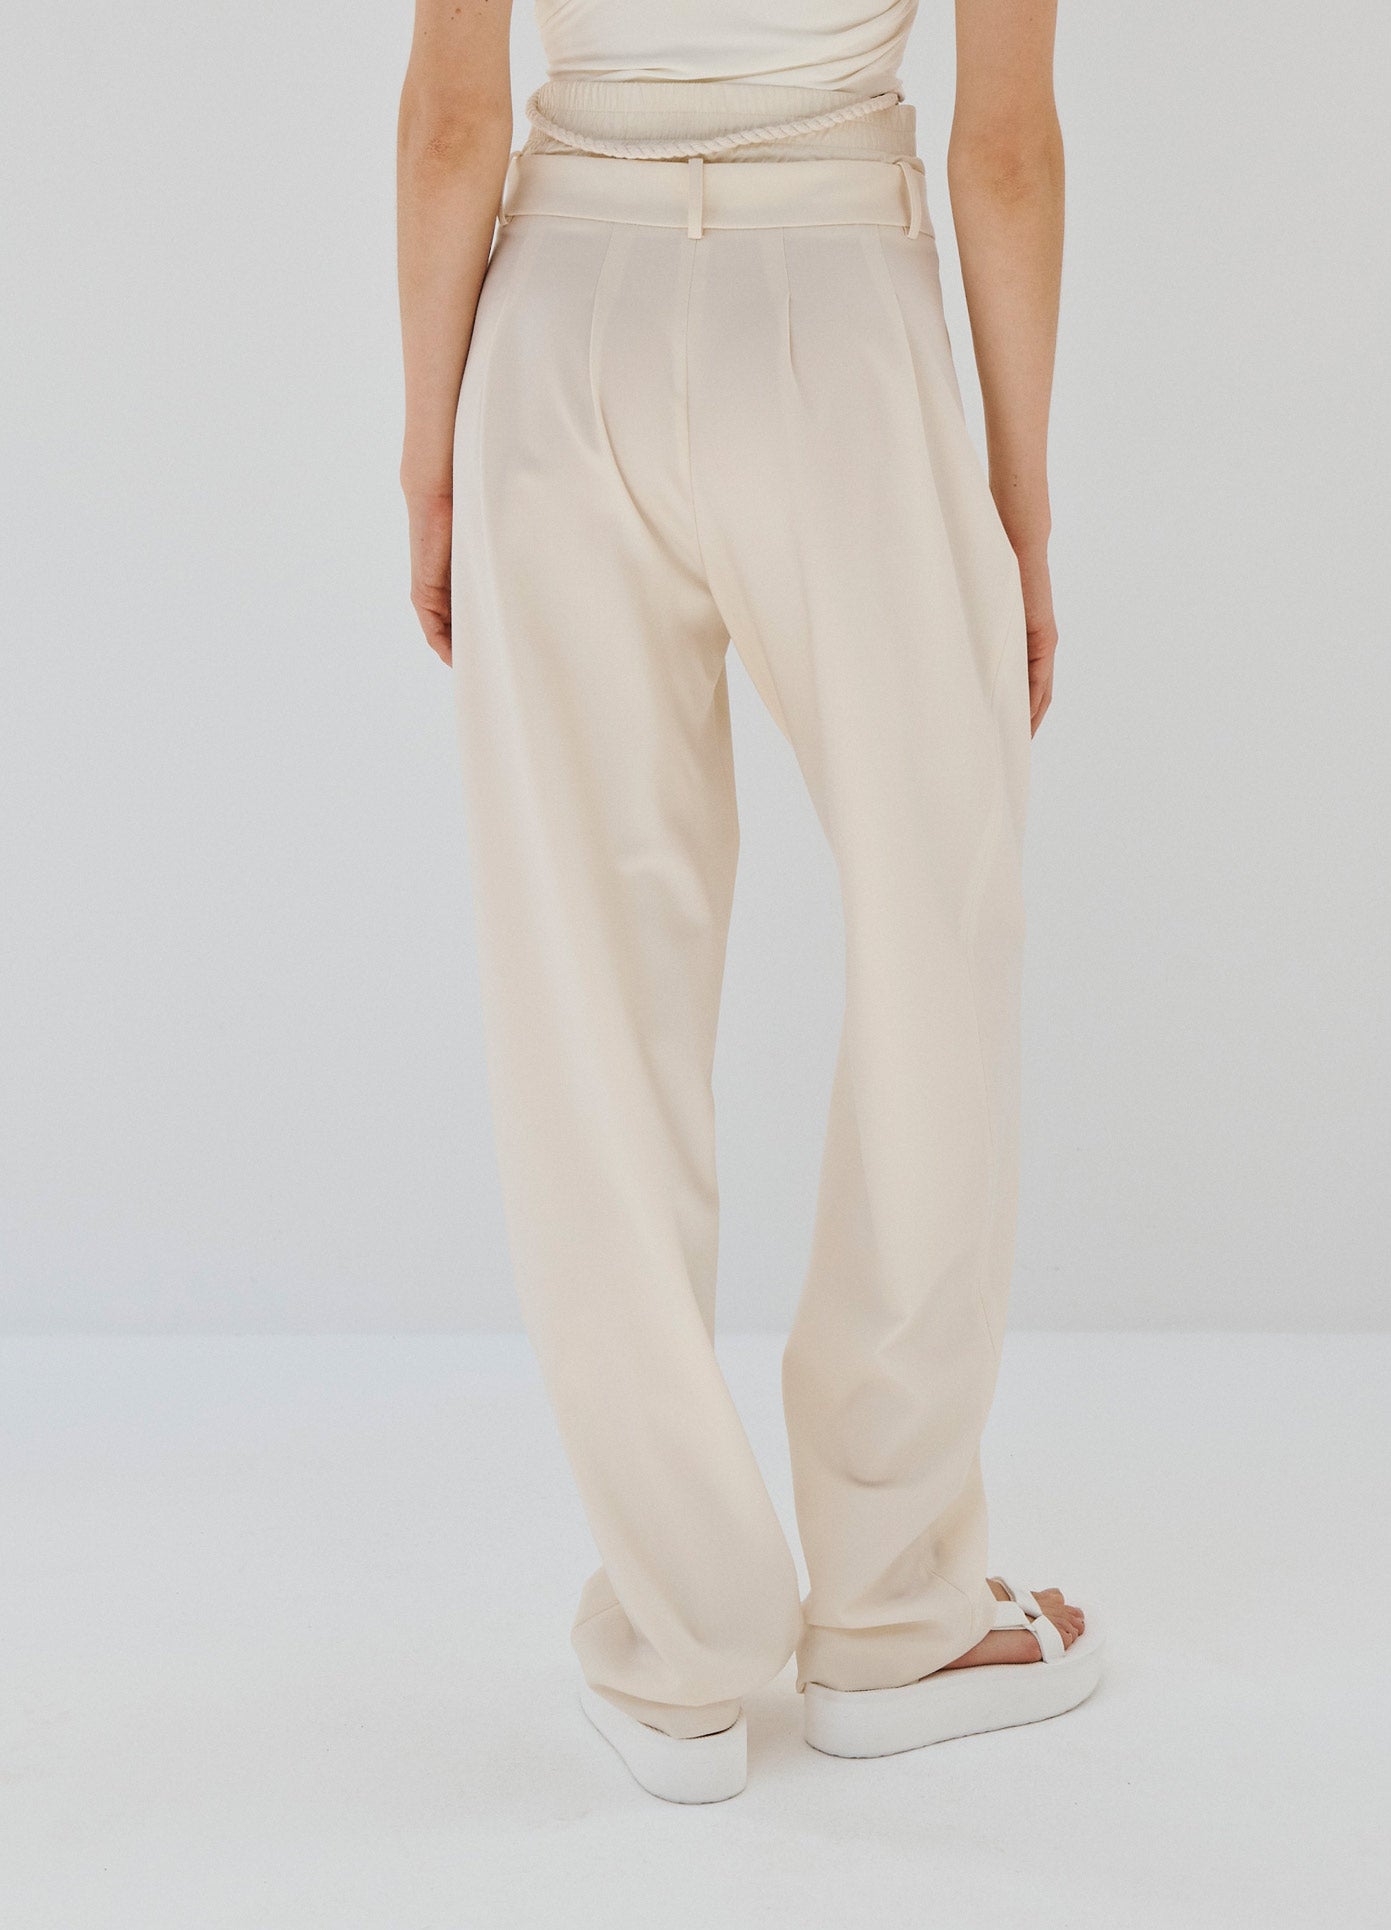 MONSE Double Waistband Trouser in Ivory on Model Back Detail View